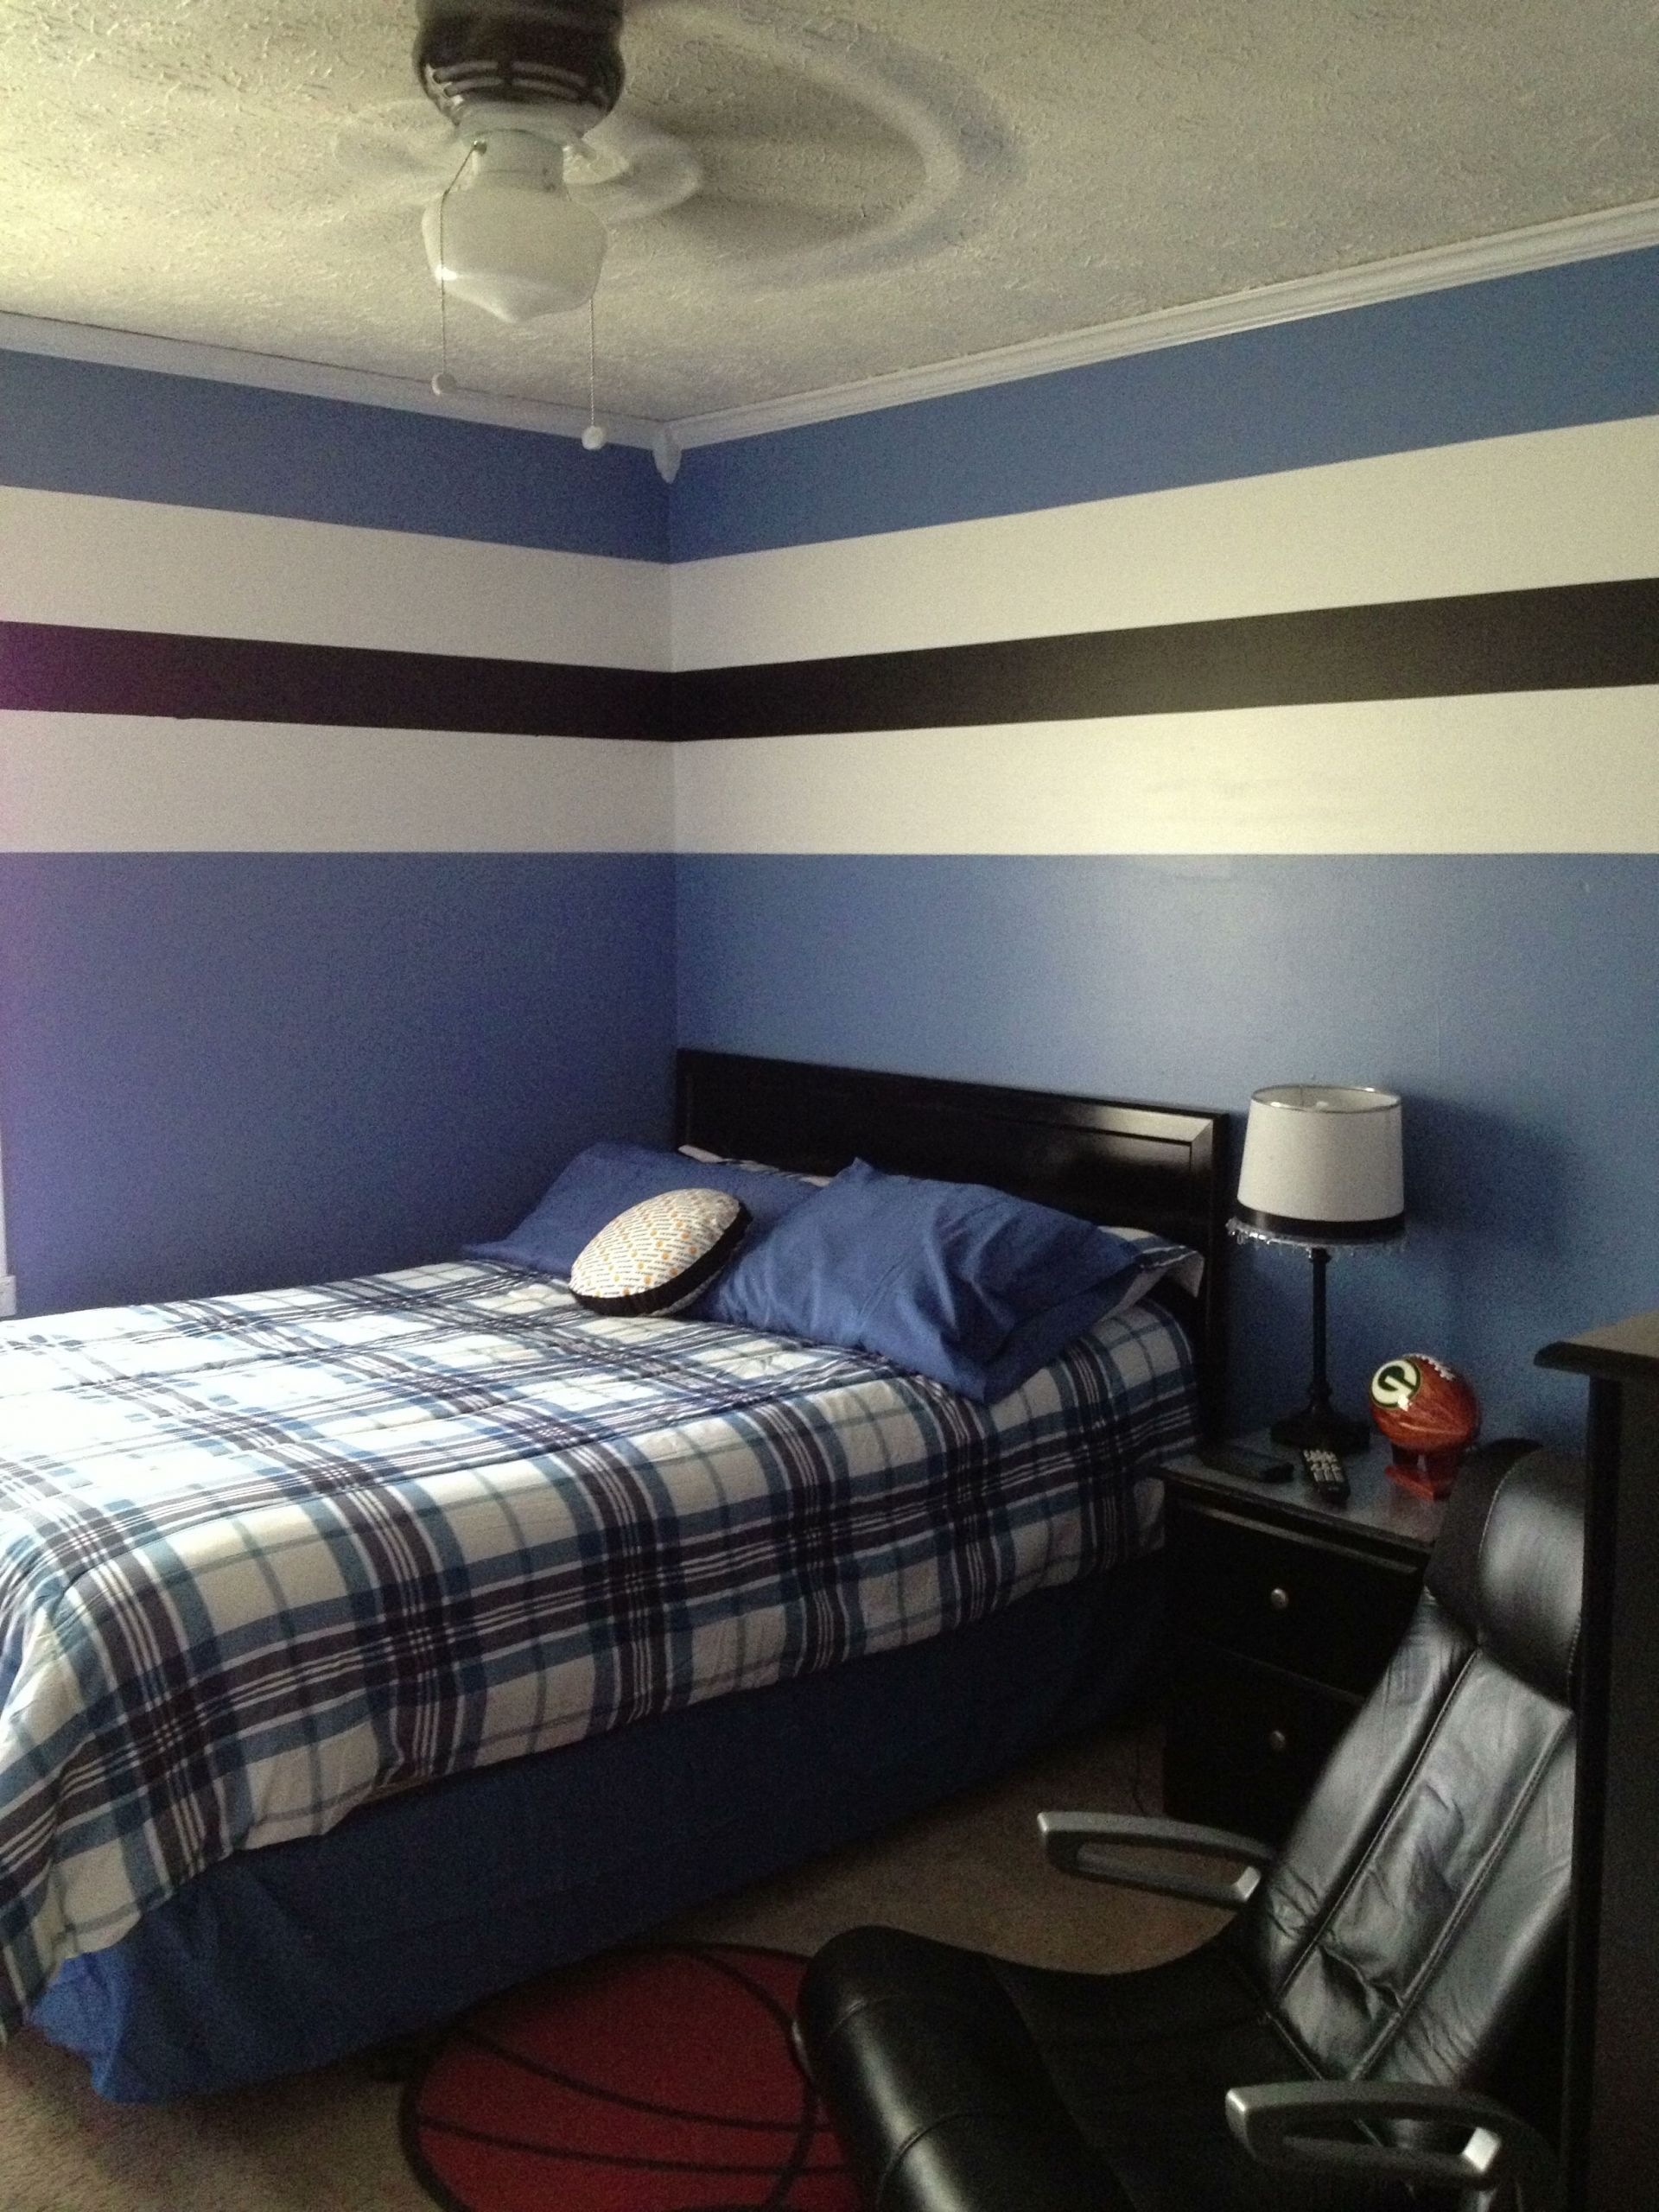 Boys Bedroom Paint
 Pin on Son s room